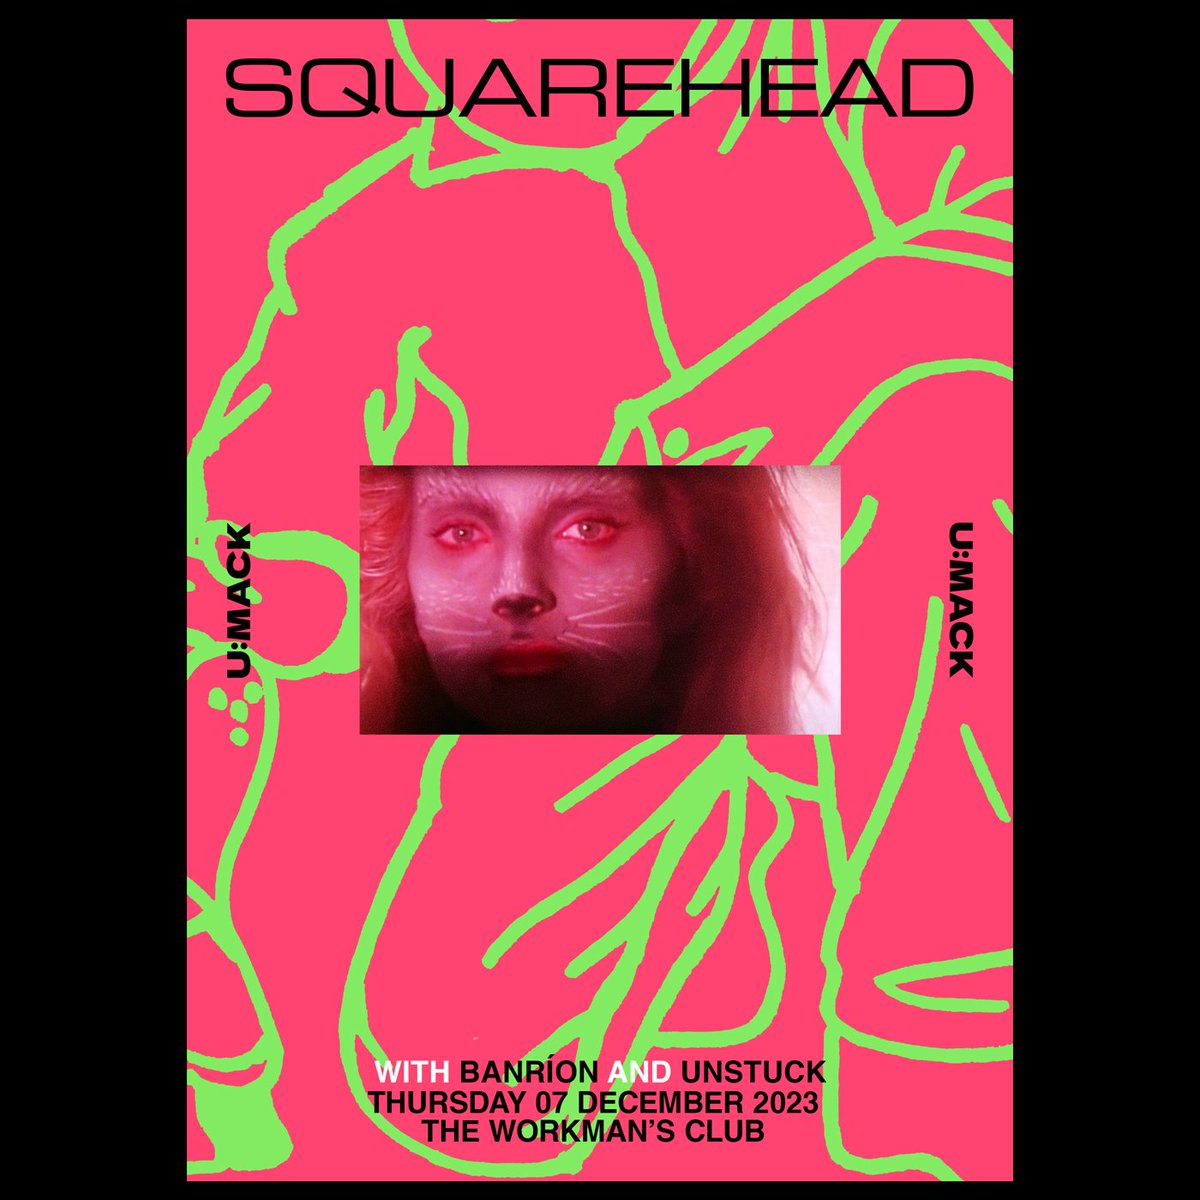 ⚠️ 𝗟𝗢𝗪 𝗧𝗜𝗖𝗞𝗘𝗧 𝗔𝗟𝗘𝗥𝗧 ⚠️ Just a handful of tickets left for the brilliant @ssquareheadd's gig at The @WorkmansDublin tomorrow 7th December. Support on the night comes from @banrionbaby & @unstuckIE 🎟 👉 bit.ly/Squarehead-Dec @umackDublin